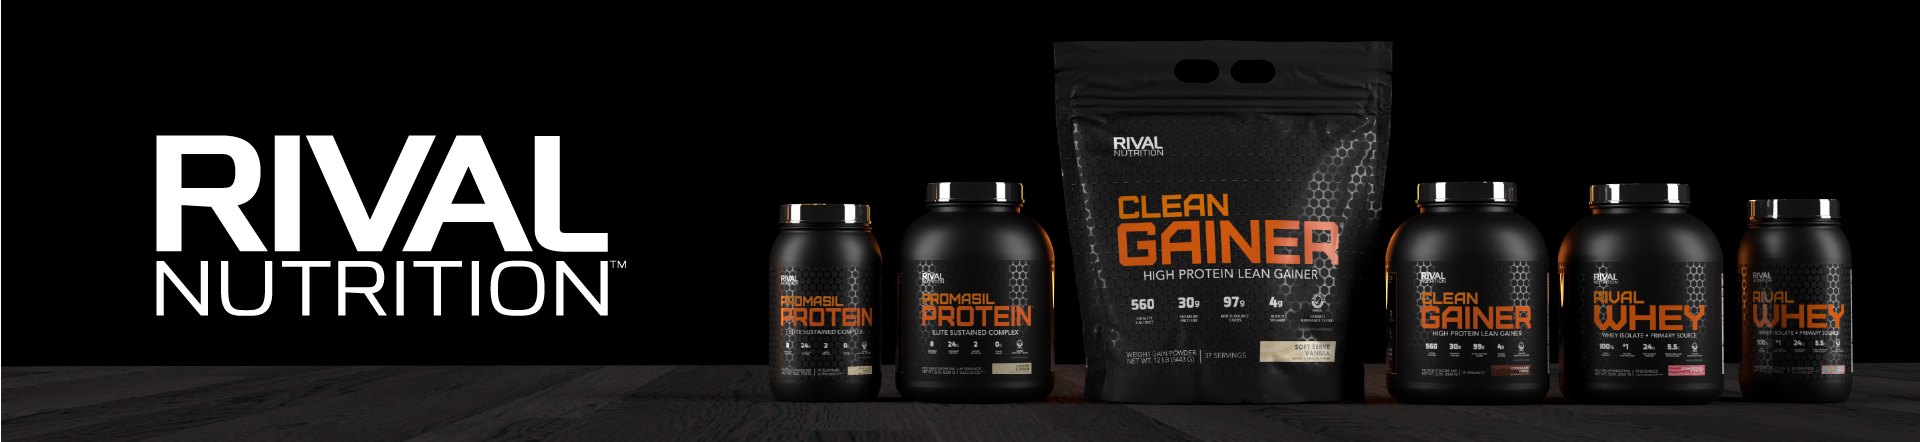 Rival NUtrition